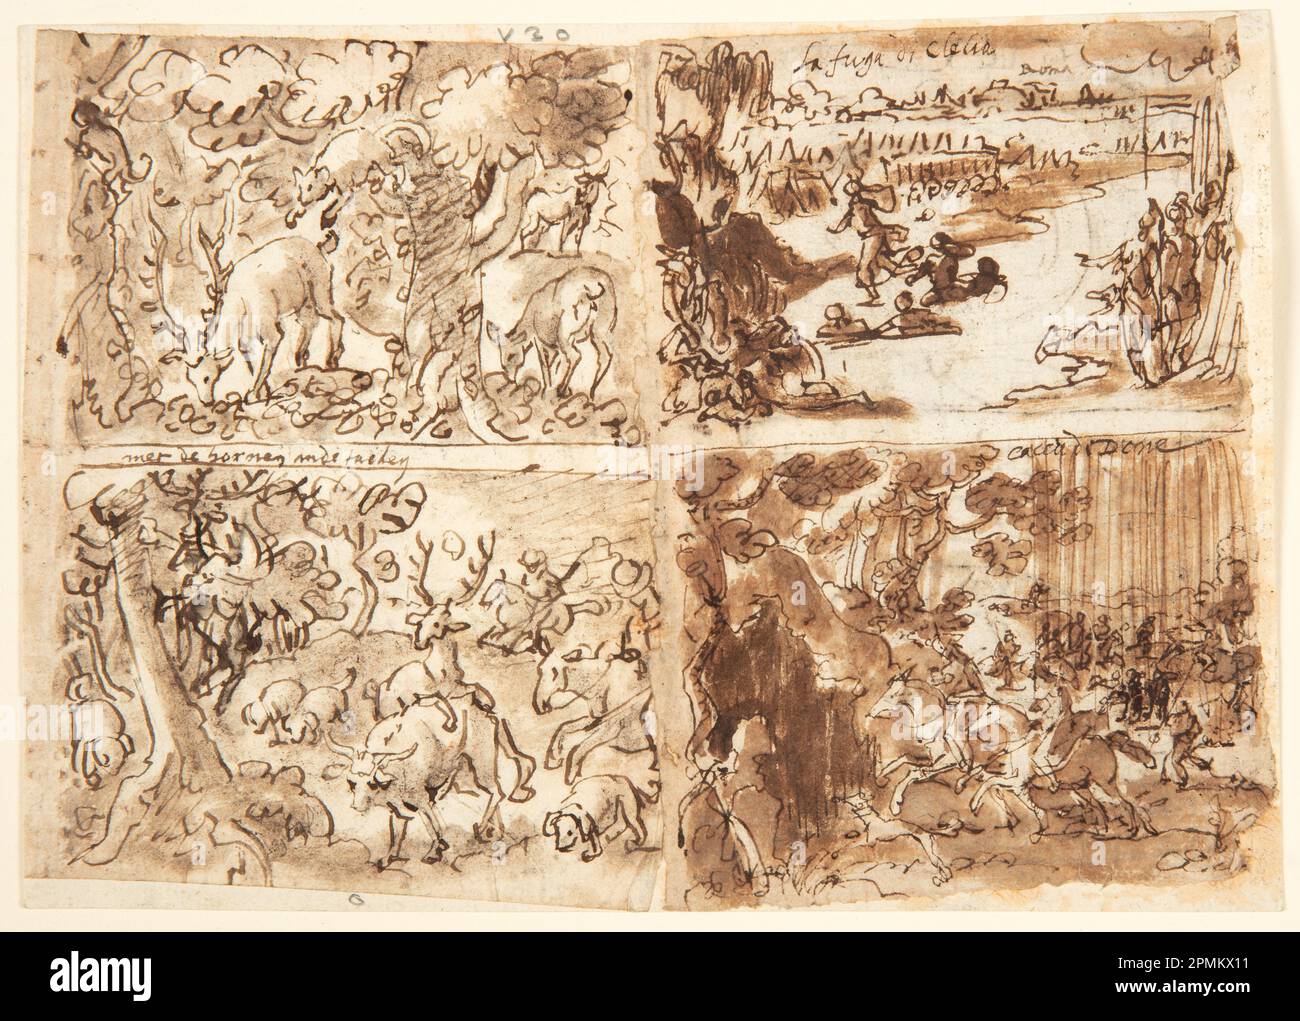 Drawing, Deer attacked by Lynxes [above left]; Deer Hunt with Hounds Tracking [below left]; Cloelia and her Companions escape Porsena's Camp [above right]; Aeneas and Dido Shelter in a Cave [below right]; Jan van der Straet, called Stradanus (Flemish, 1523–1605); Engraved by Hans Collaert II (Flemish, 1560 - 1628); Published by Philips Galle (Flemish, 1537 - 1612); Subject: Petrus Angelius Bargaeus (Italian, 1517 – 1596), Pseudo-Oppian (Greco-Syrian, active 212 – 217); Netherlands; pen and brown ink, brush and wash on two joined sheets of laid paper Stock Photo